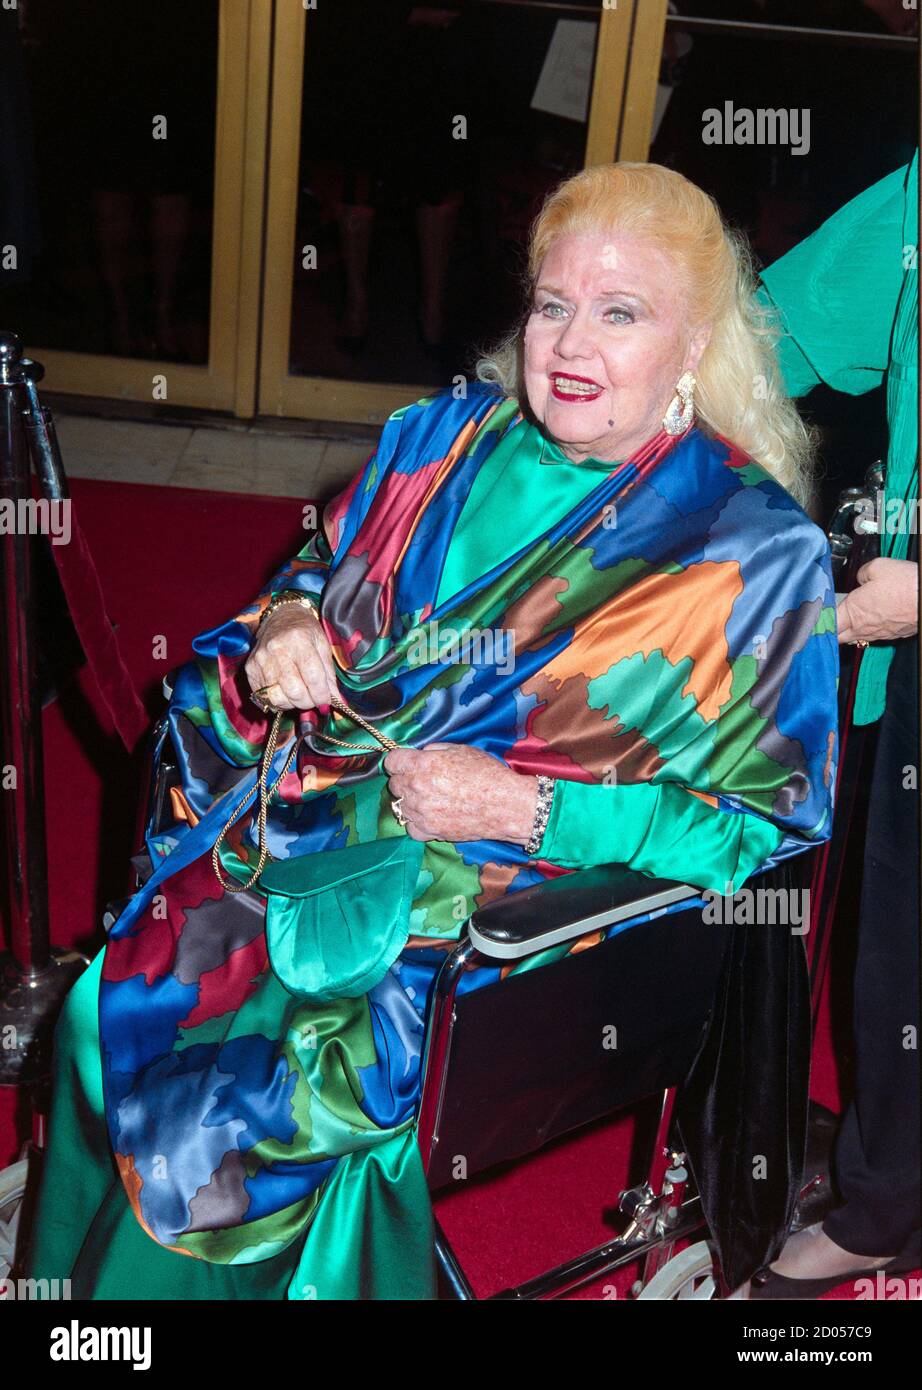 ARCHIVE: LOS ANGELES, CA. April 28, 1994: Actress Ginger Rogers at the premiere of 'That's Entertainment! III' in Los Angeles. File photo © Paul Smith/Featureflash Stock Photo